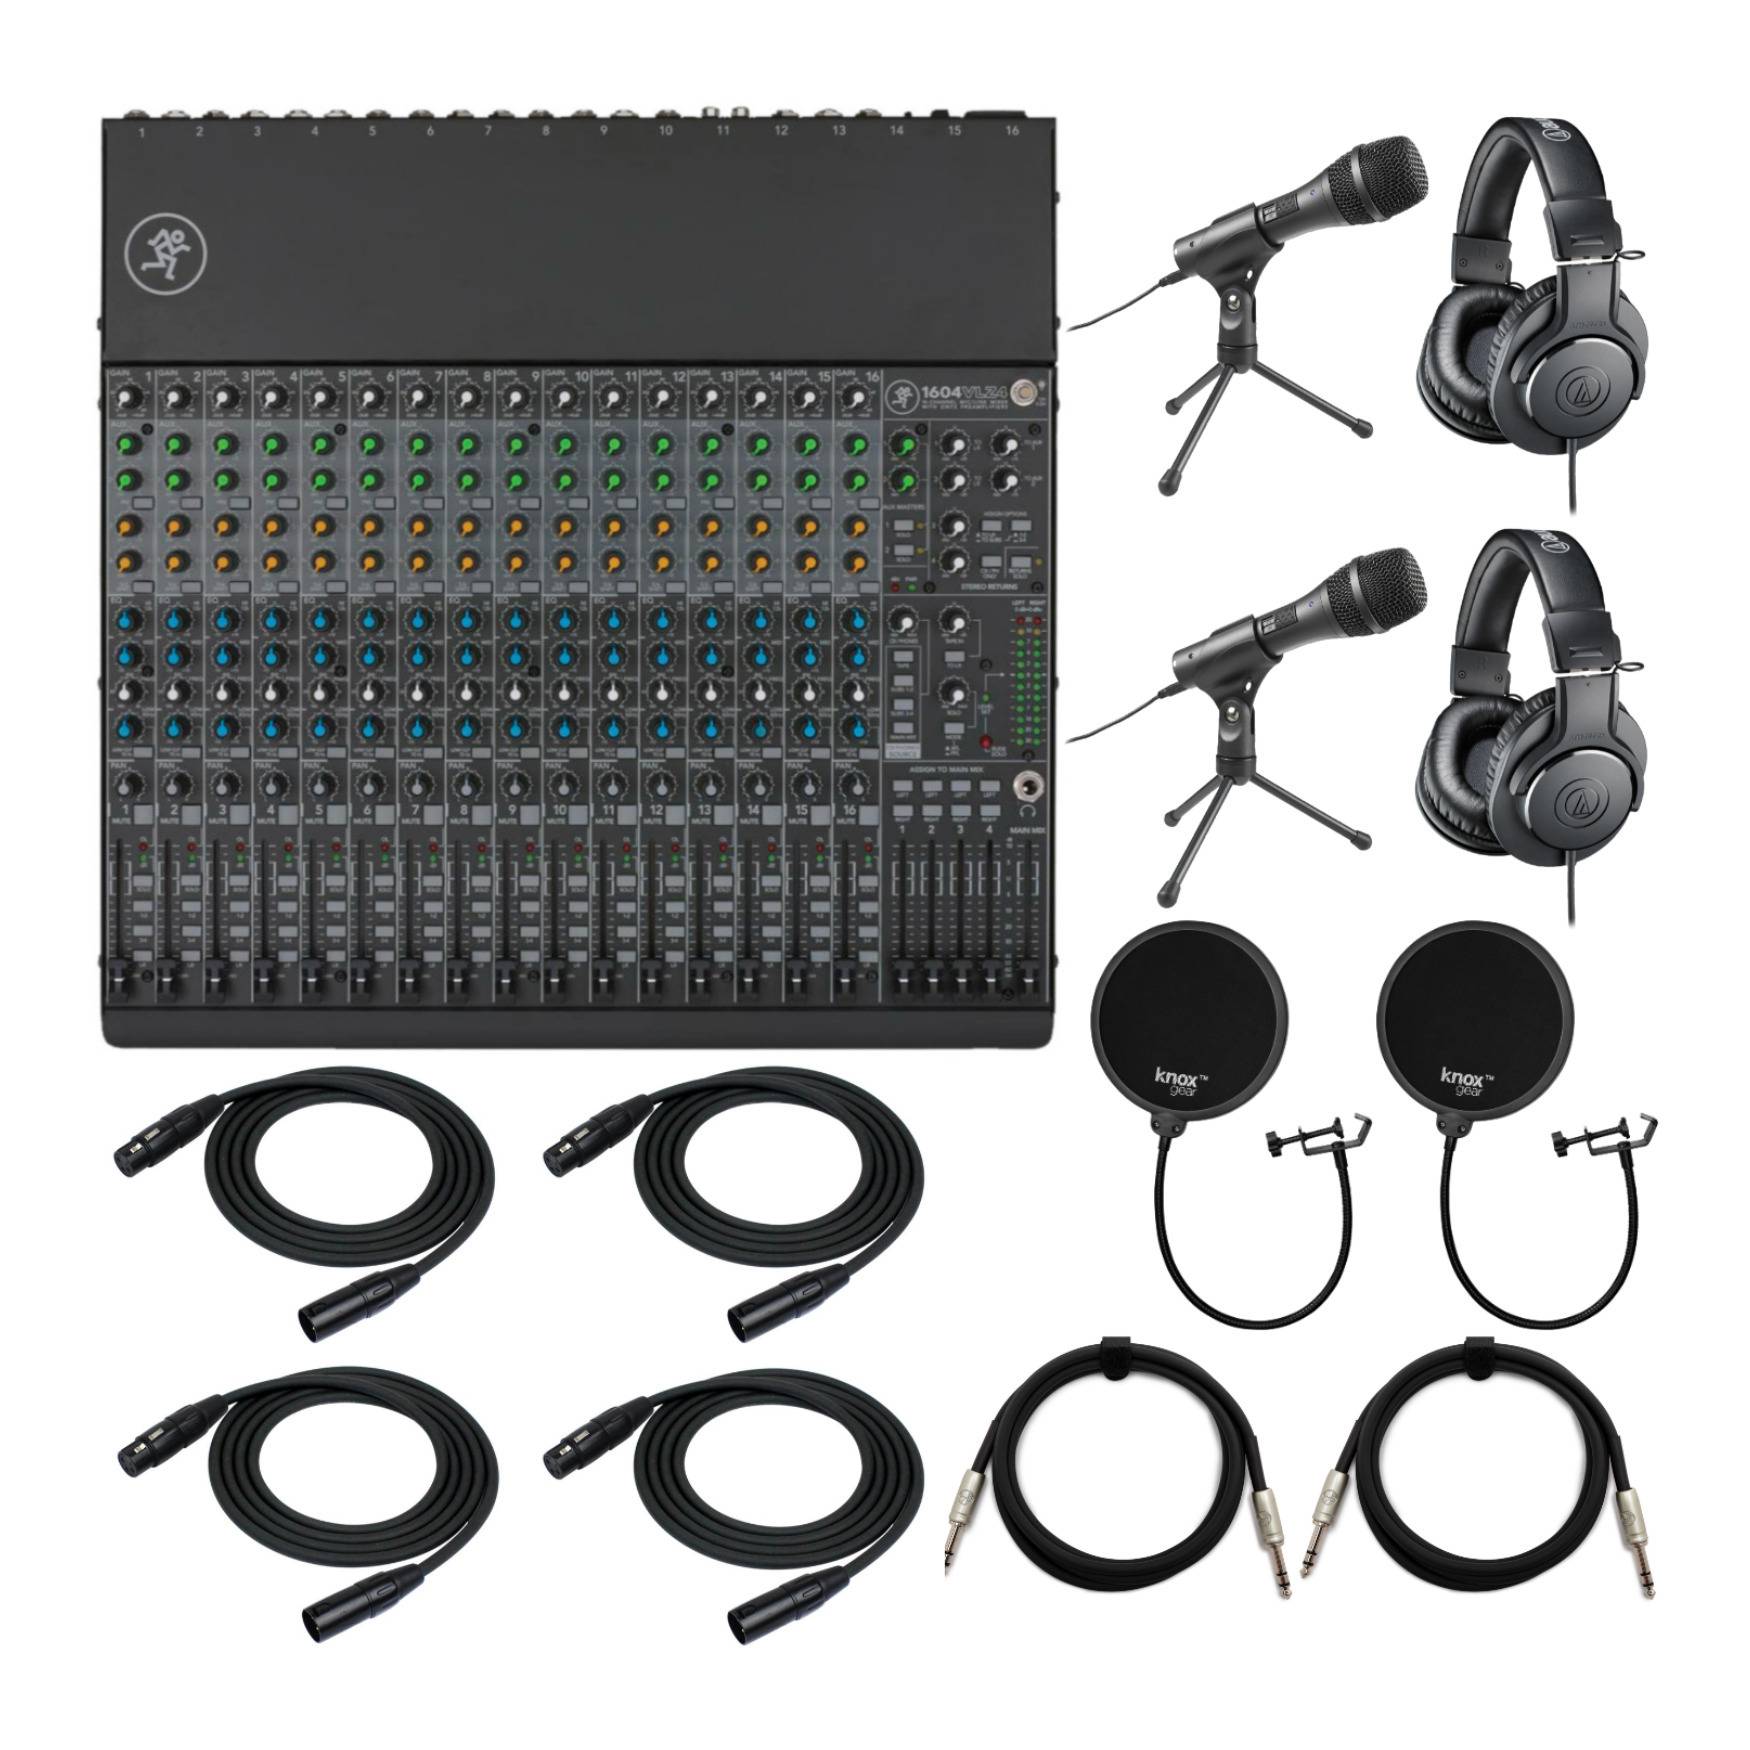 Mackie 1604VLZ4 16-Channel Compact 4-Bus Mixer with Mic, Headphone and Accessory